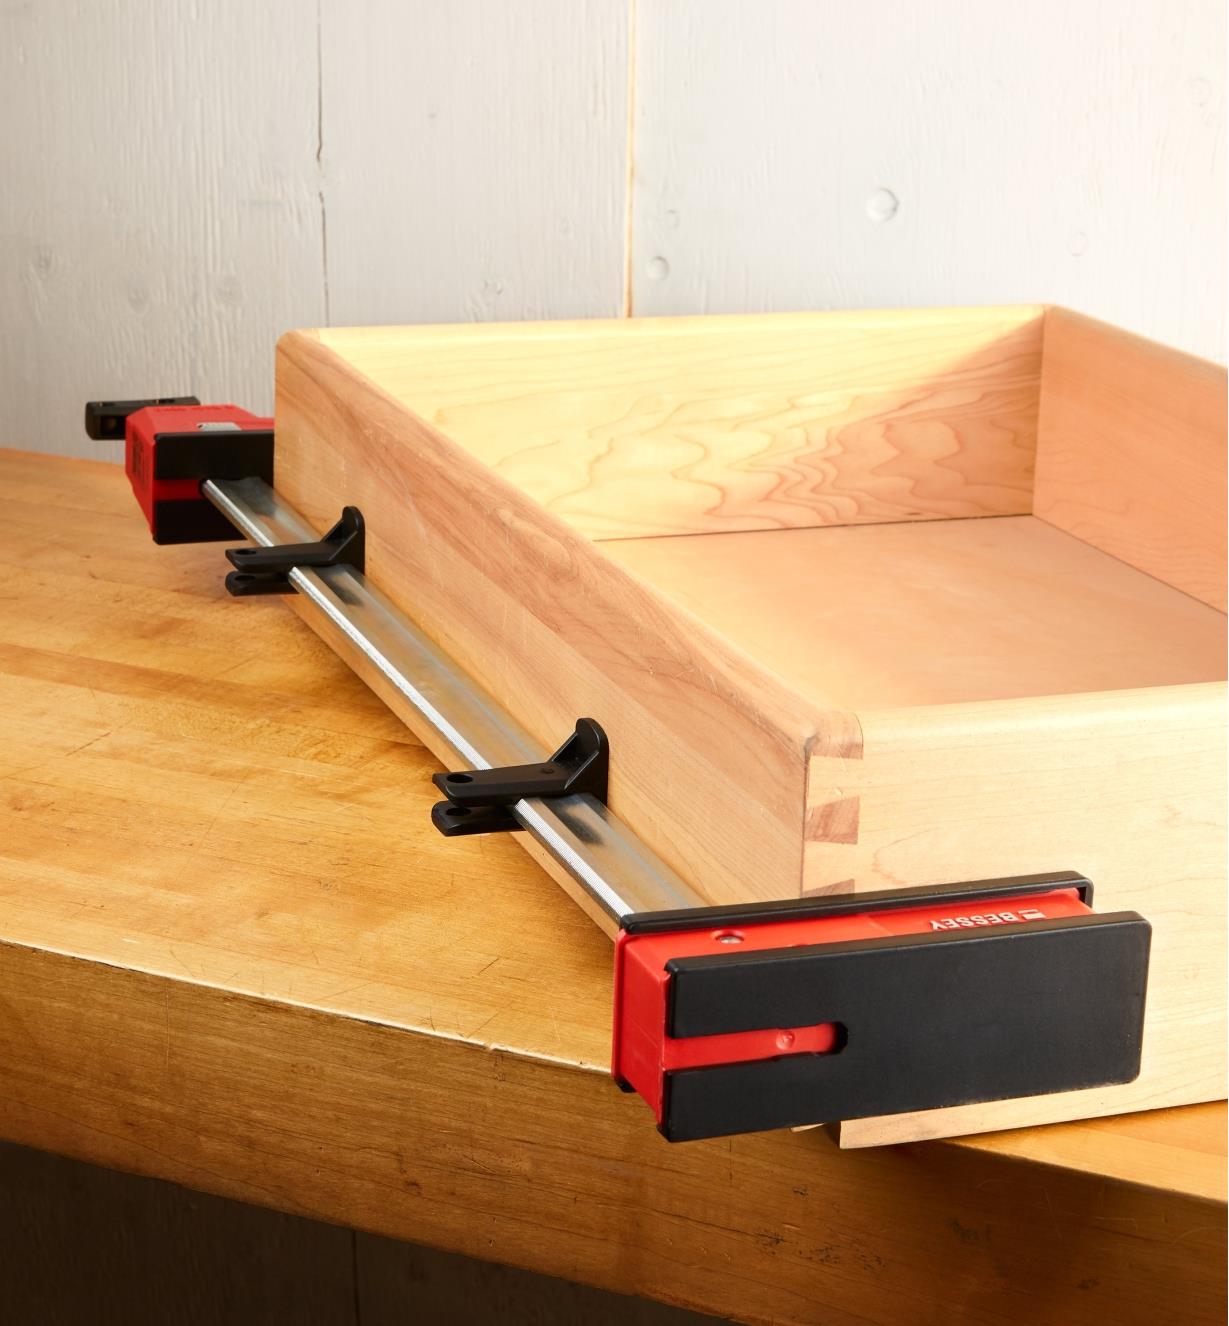 Two Bessey K-Body rail protectors mounted on the rail of K-Body clamp used to hold a drawer assembly